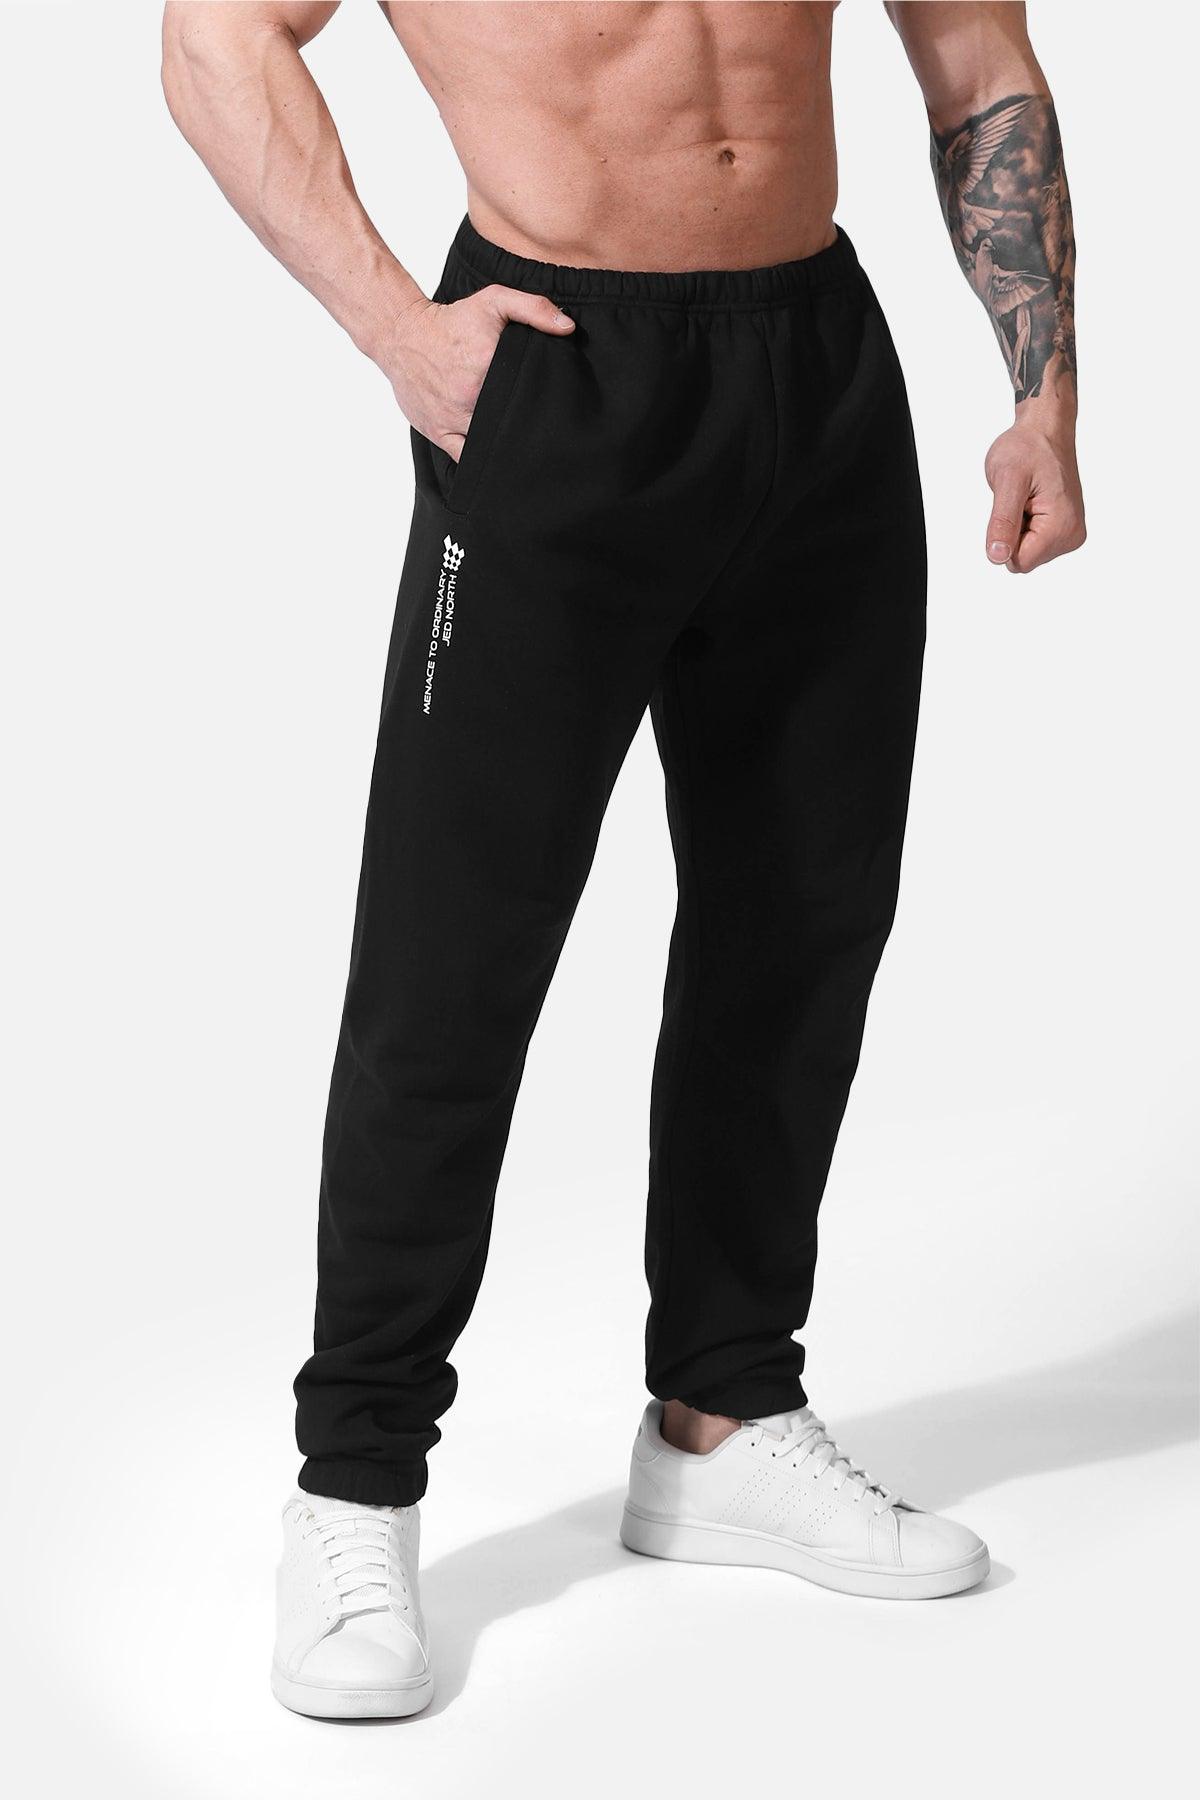 All Or Nothing French Terry Joggers - Black